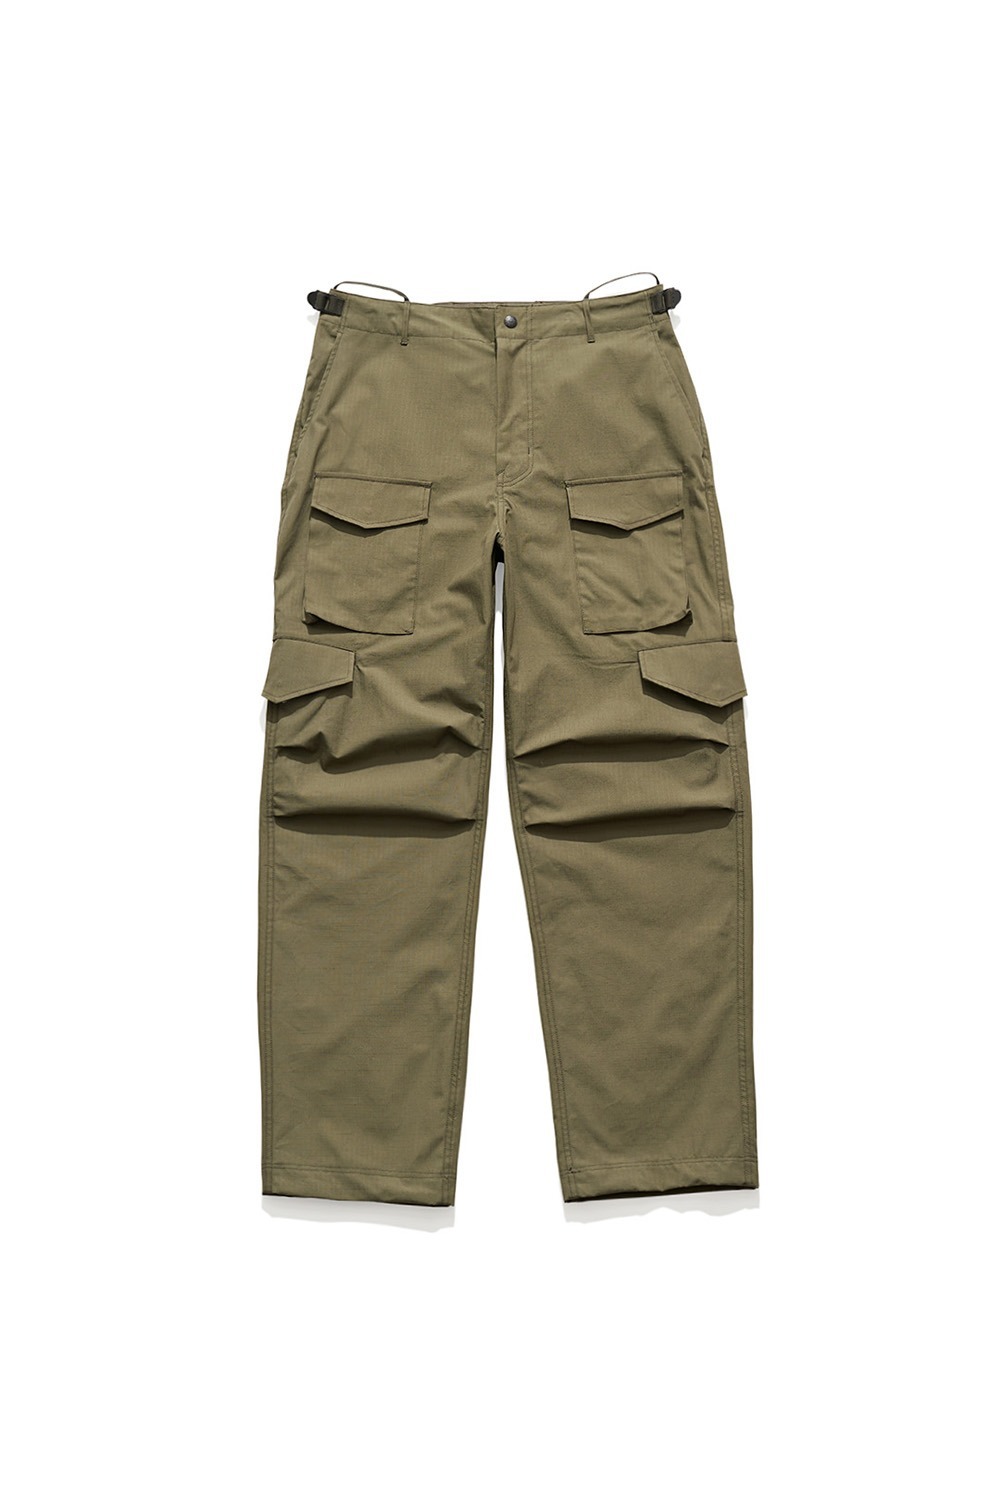 M65 PANTS / OLIVE RIPSTOP